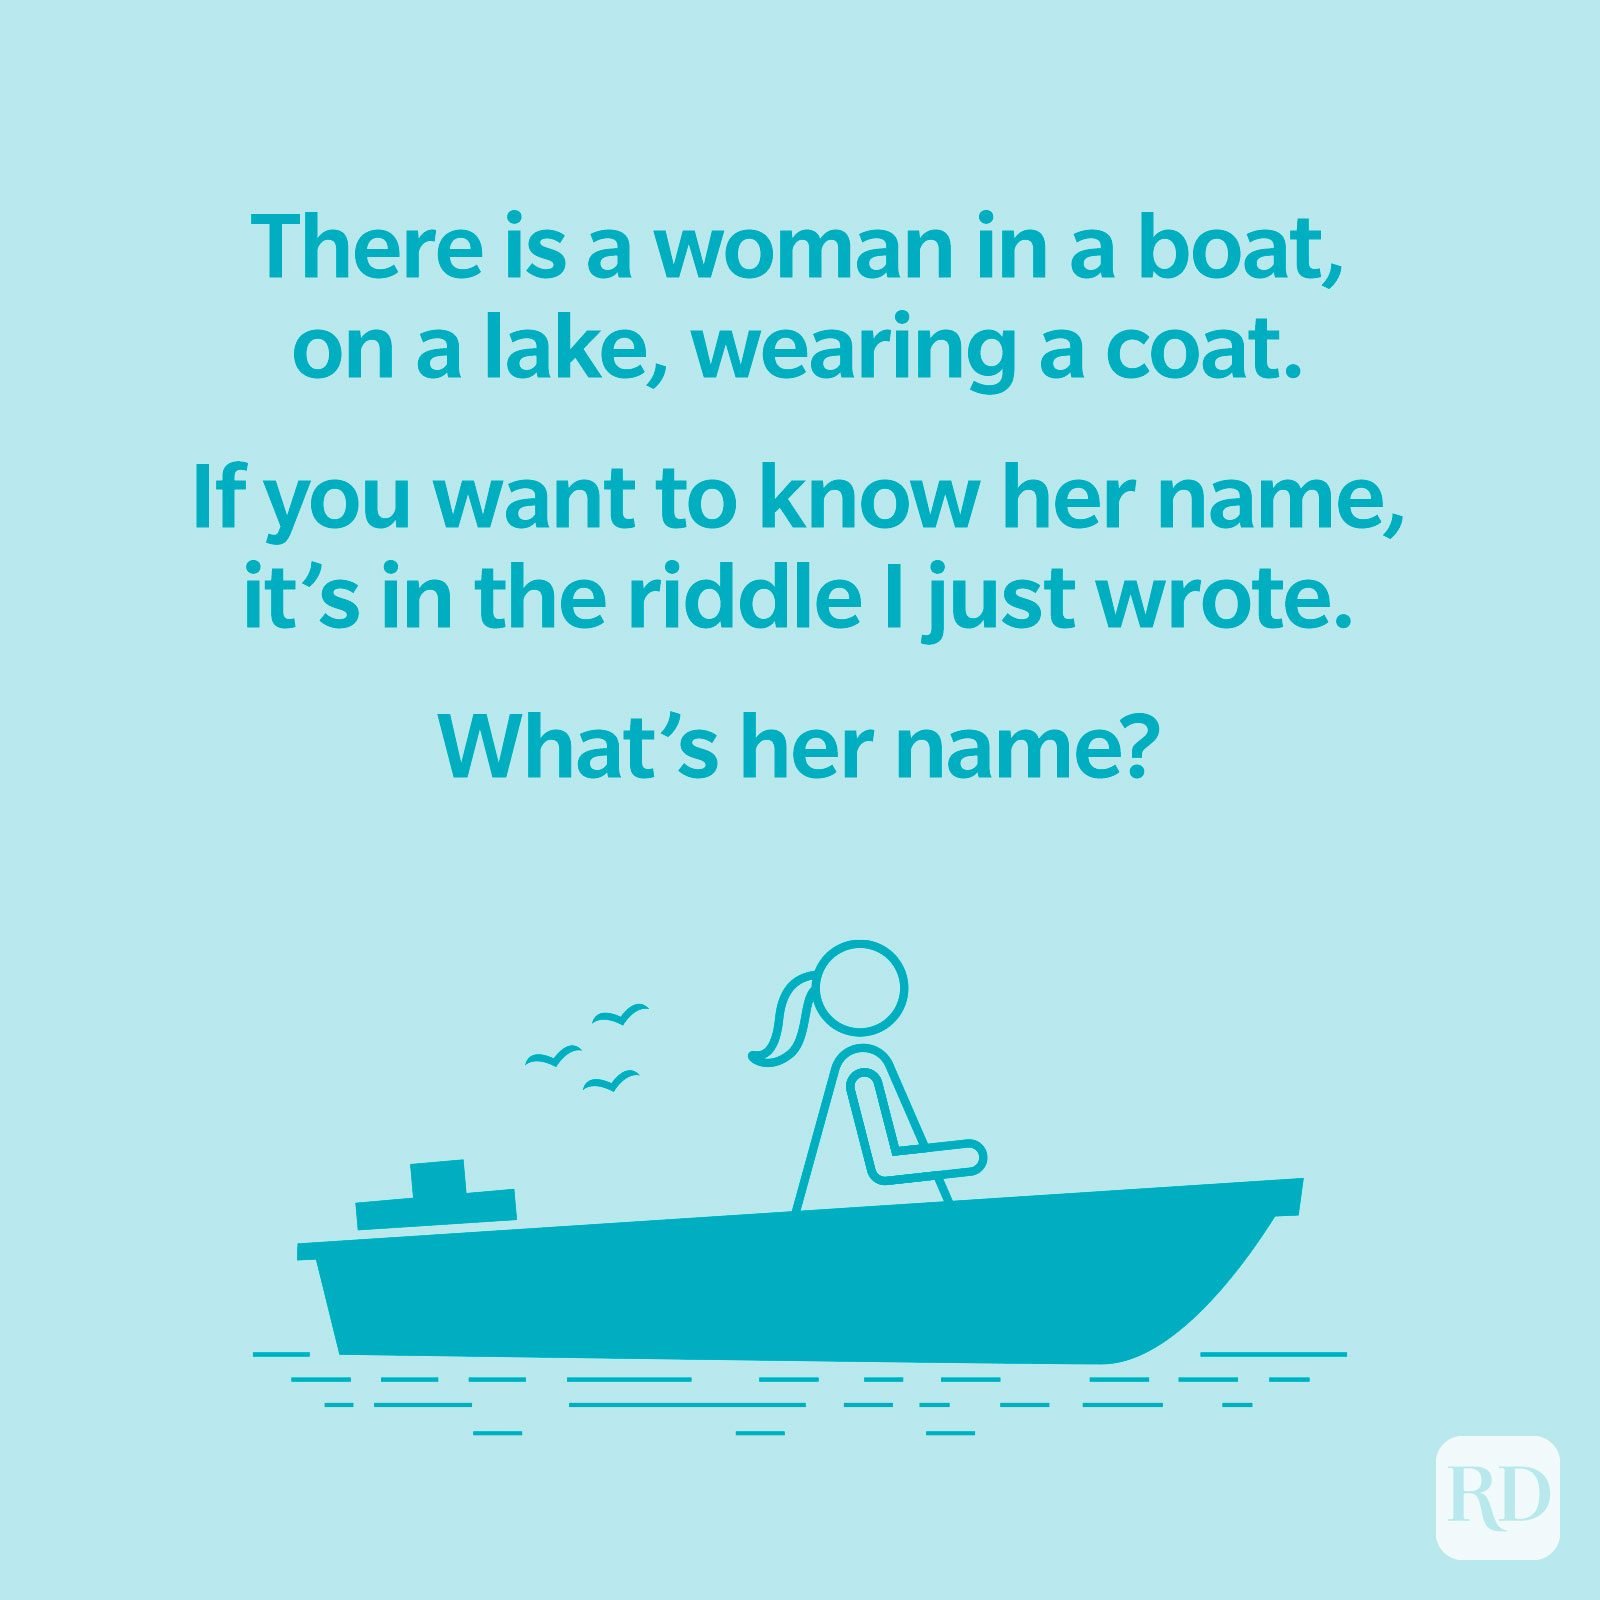 https://www.rd.com/wp-content/uploads/2023/09/Theres-a-Woman-in-a-Boat-Riddle-GettyImages-1270177042.jpg